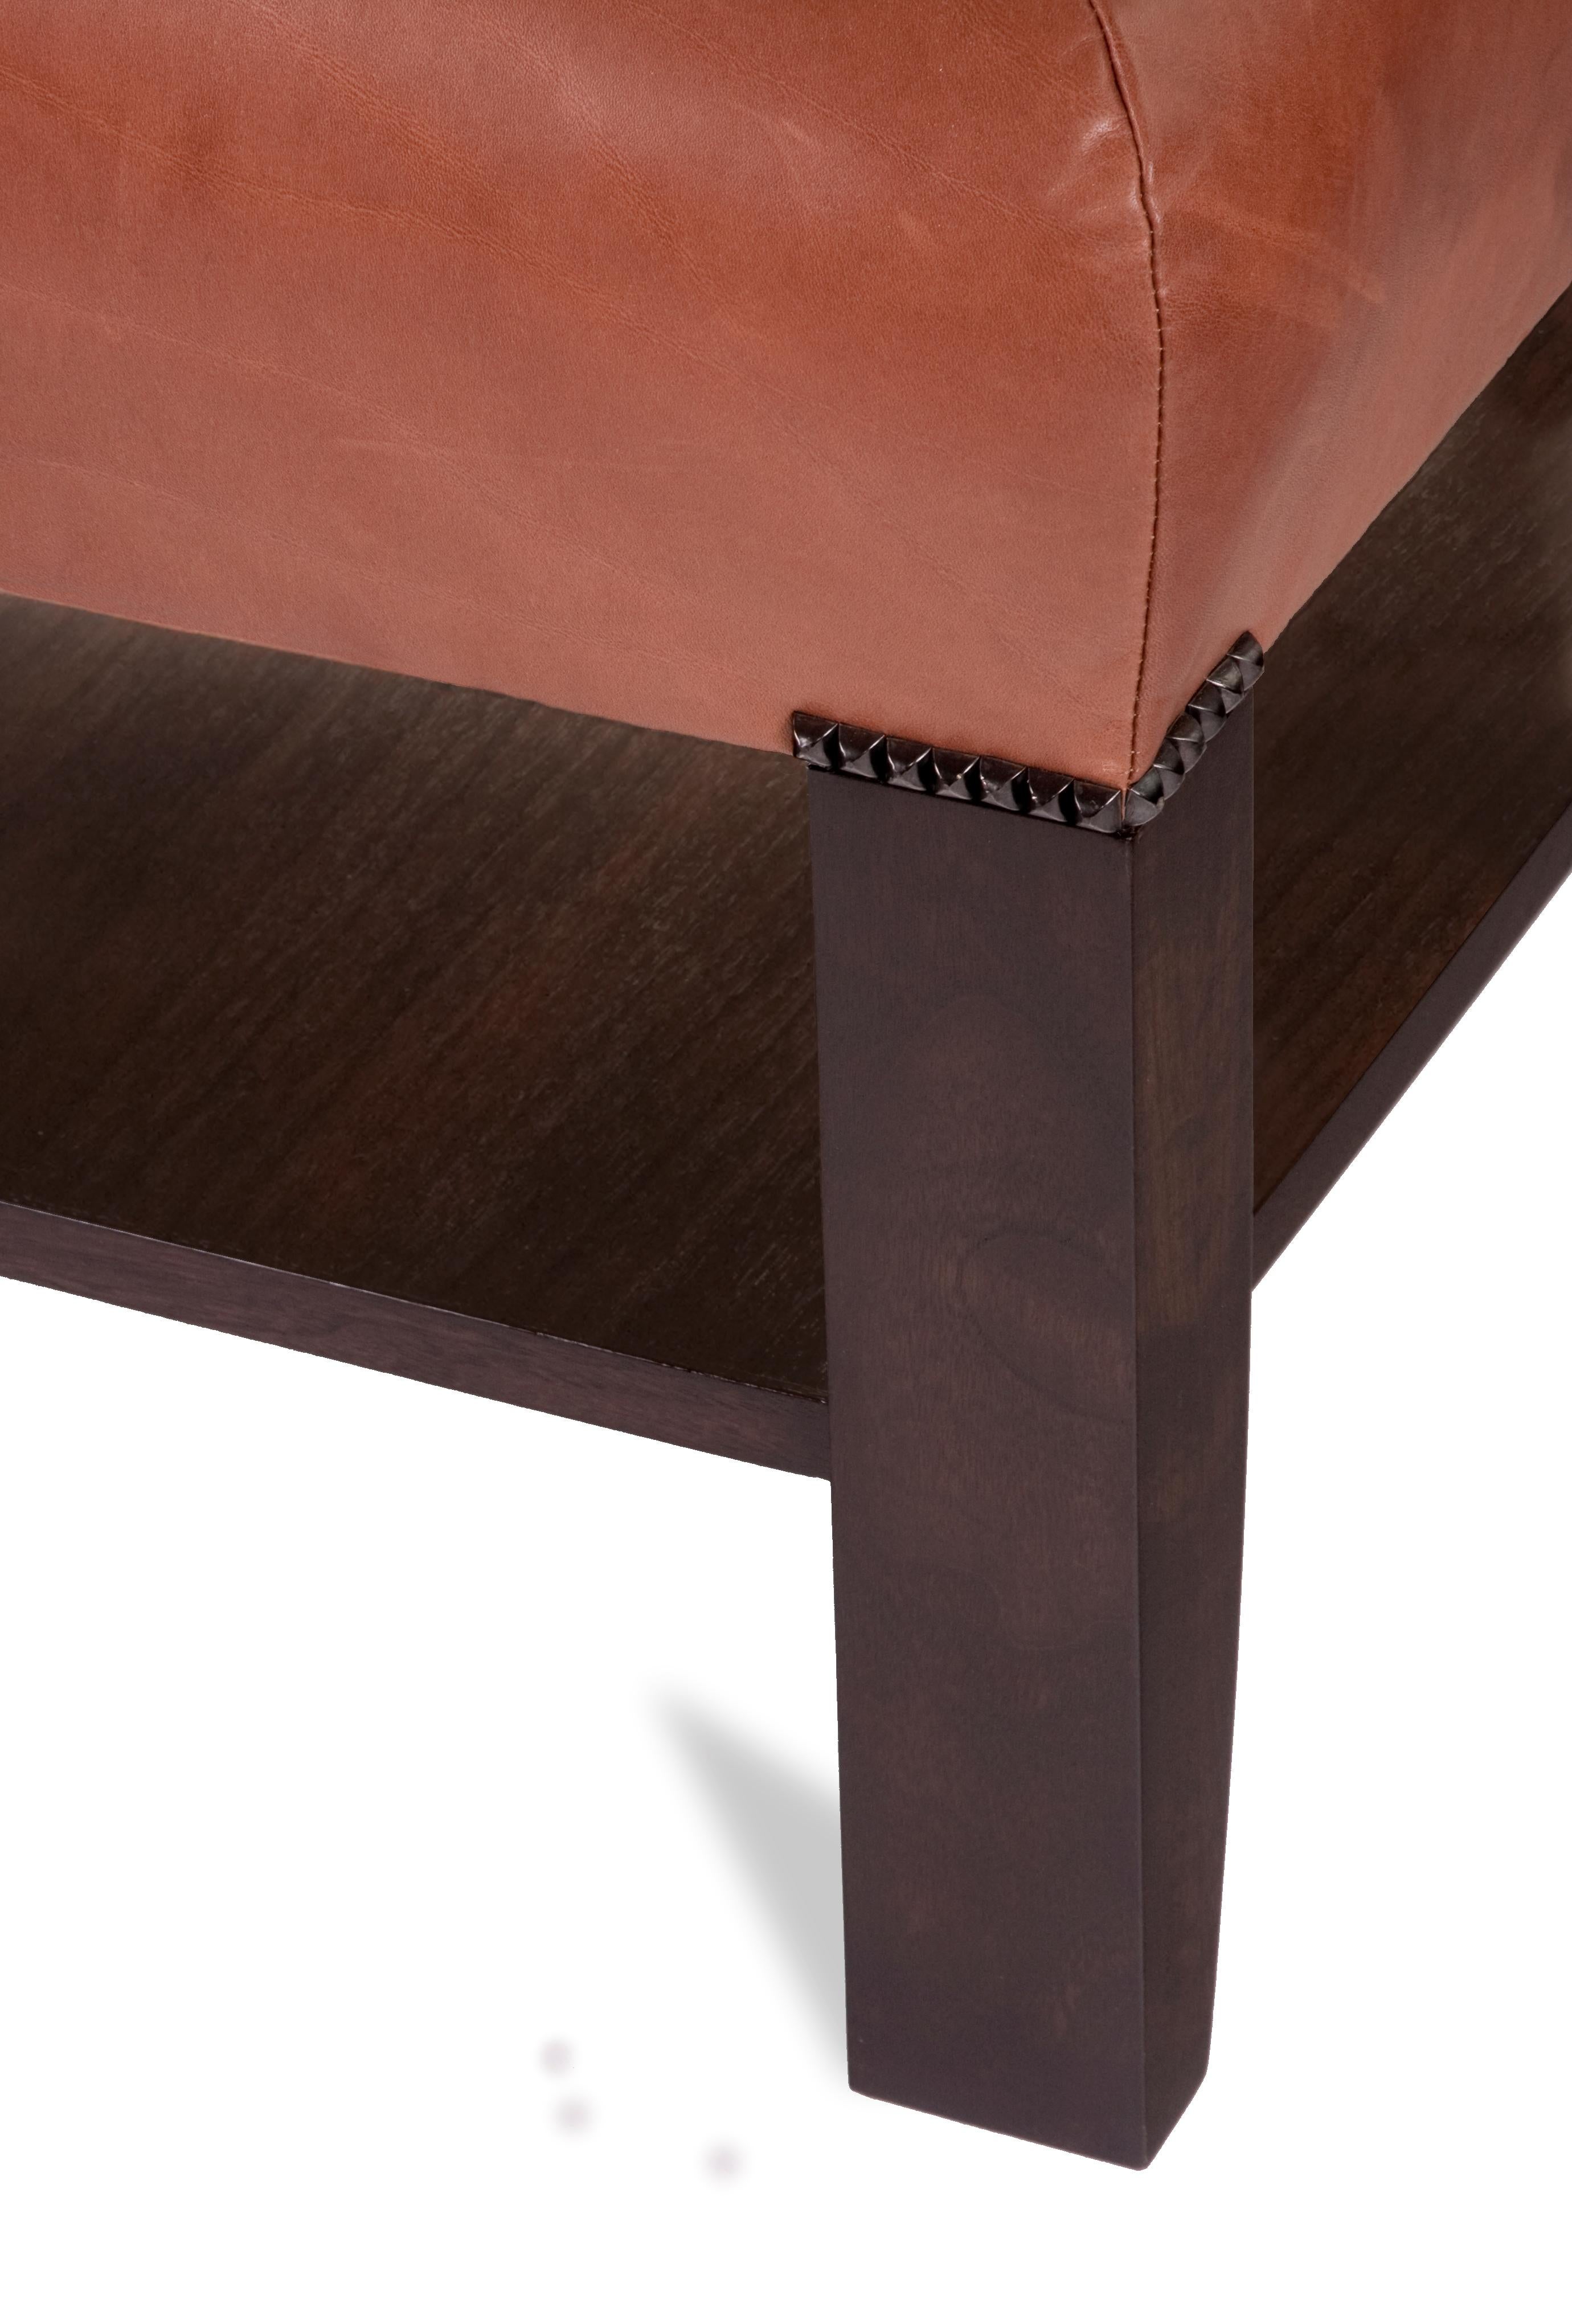 Ottoman /Cocktail Table in Leather and Walnut with Macassar Ebony Inset Tray

The Item shown is in inventory and available now. 
PROMOTION: Complimentary re-upholstering; Customer may provide leather or fabric COM / COL.

